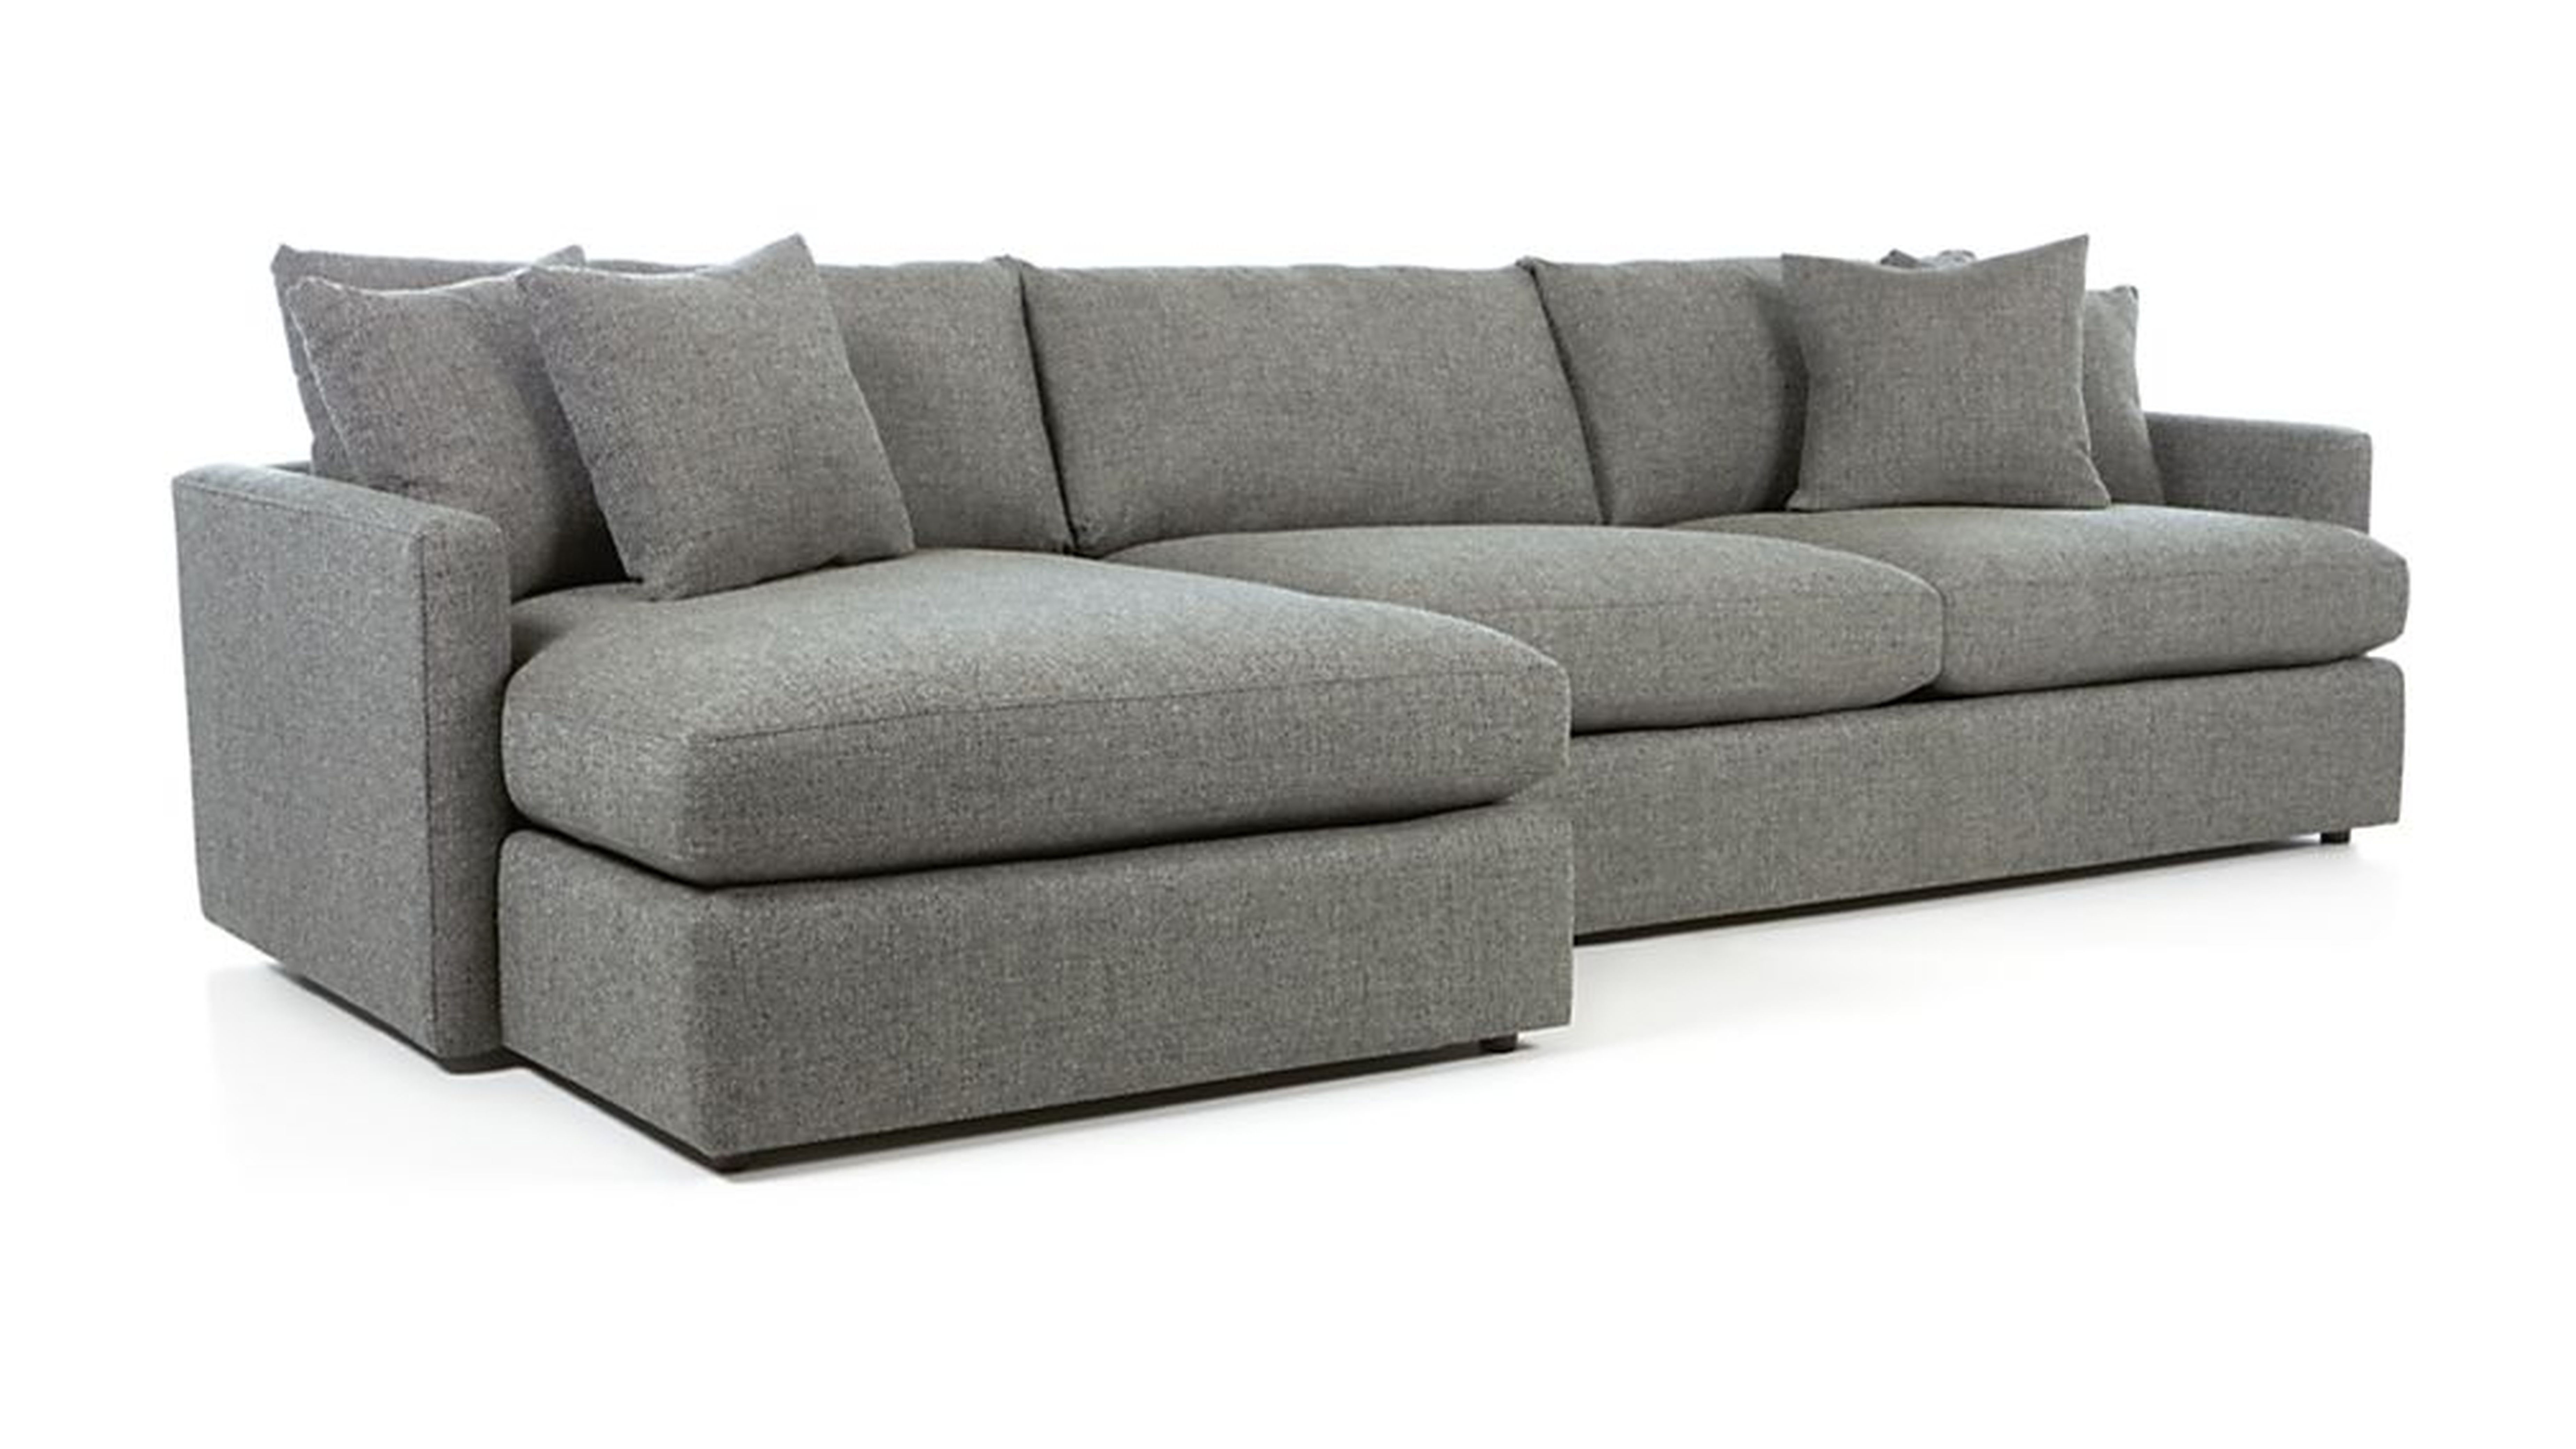 Lounge II 2-Piece Sectional Sofa - Steel - Crate and Barrel